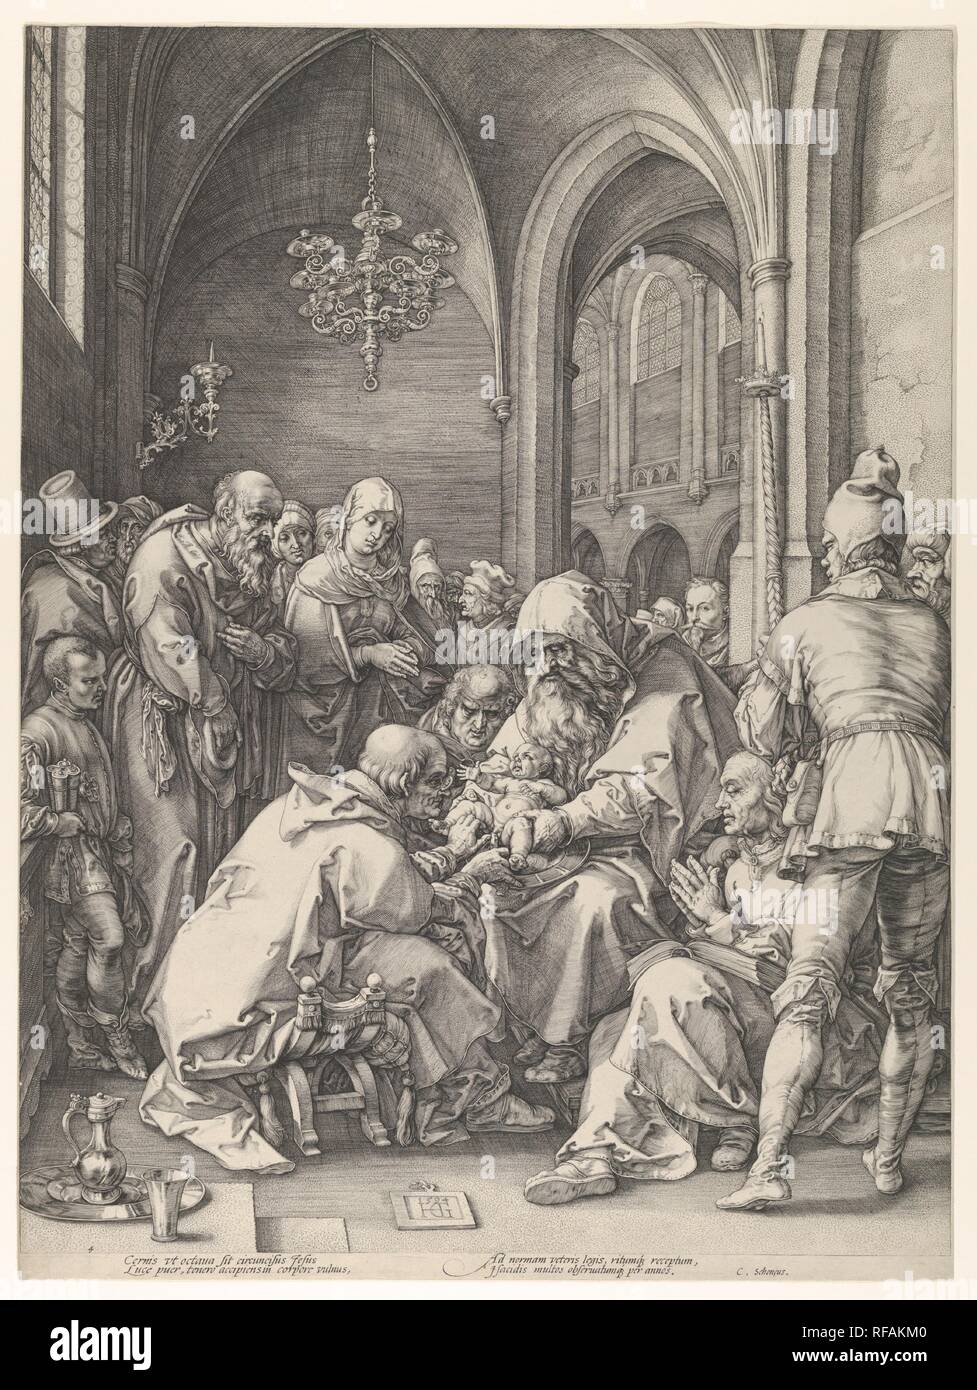 The Circumcision. Artist: Hendrick Goltzius (Netherlandish, Mühlbracht 1558-1617 Haarlem). Dimensions: Image: 18 1/4 x 13 13/16 in. (46.4 x 35.1 cm). Date: n.d..  The series to which this engraving belongs is commonly known as Goltzius's Meisterstiche, or masterpiece--by analogy with the three famous Meisterstiche by his great predecessor Albrecht Dürer. In a remarkable demonstration of virtuosity in the series, Goltzius imitated the styles of various masters in compositions of his own invention. In this case, he looked to the composition of Dürer's woodcut Circumcision from the series The Lif Stock Photo